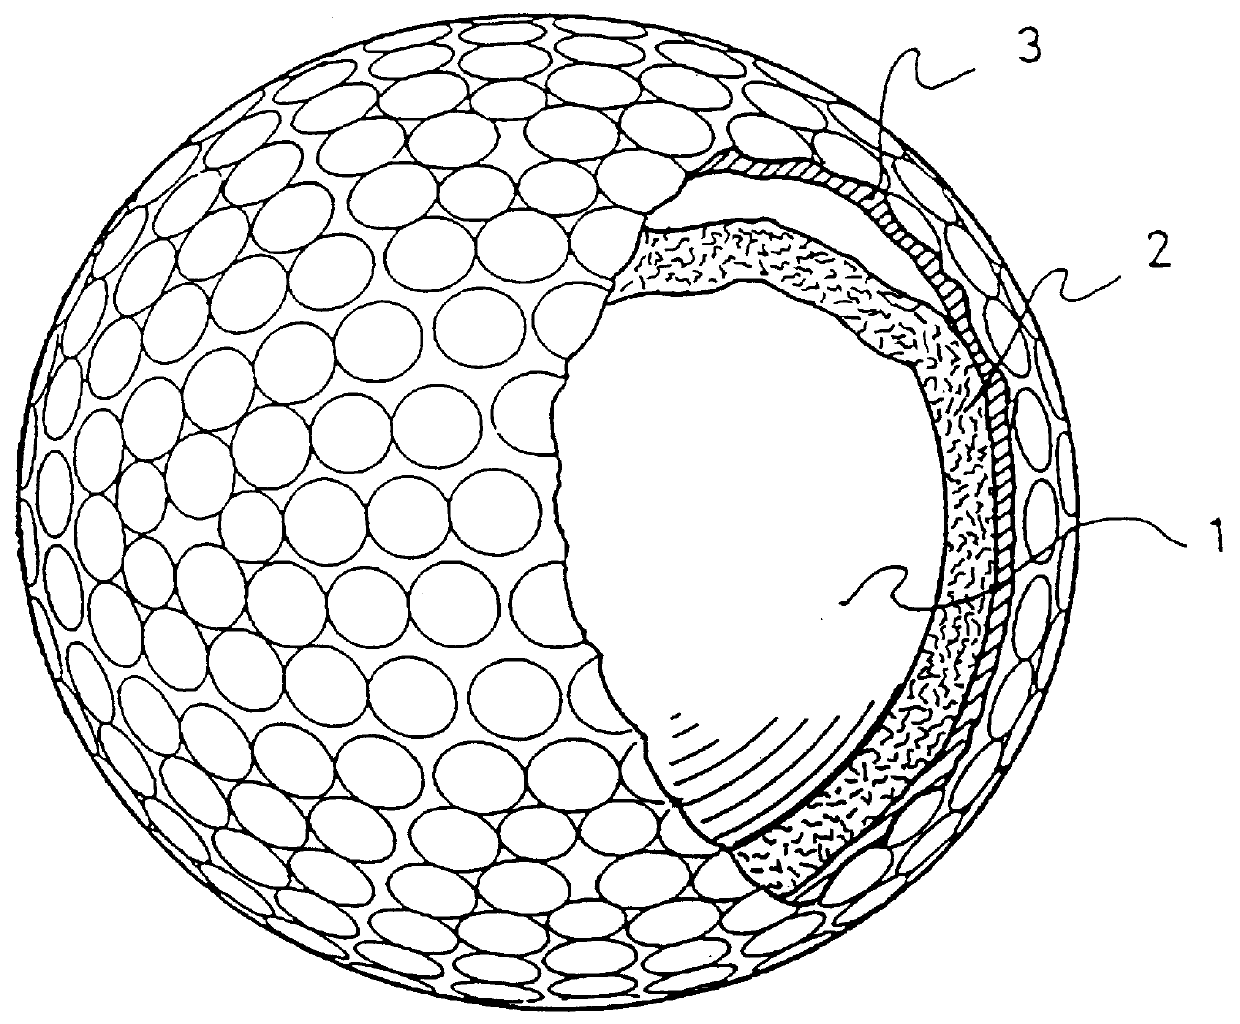 Golf ball with improved intermediate layer